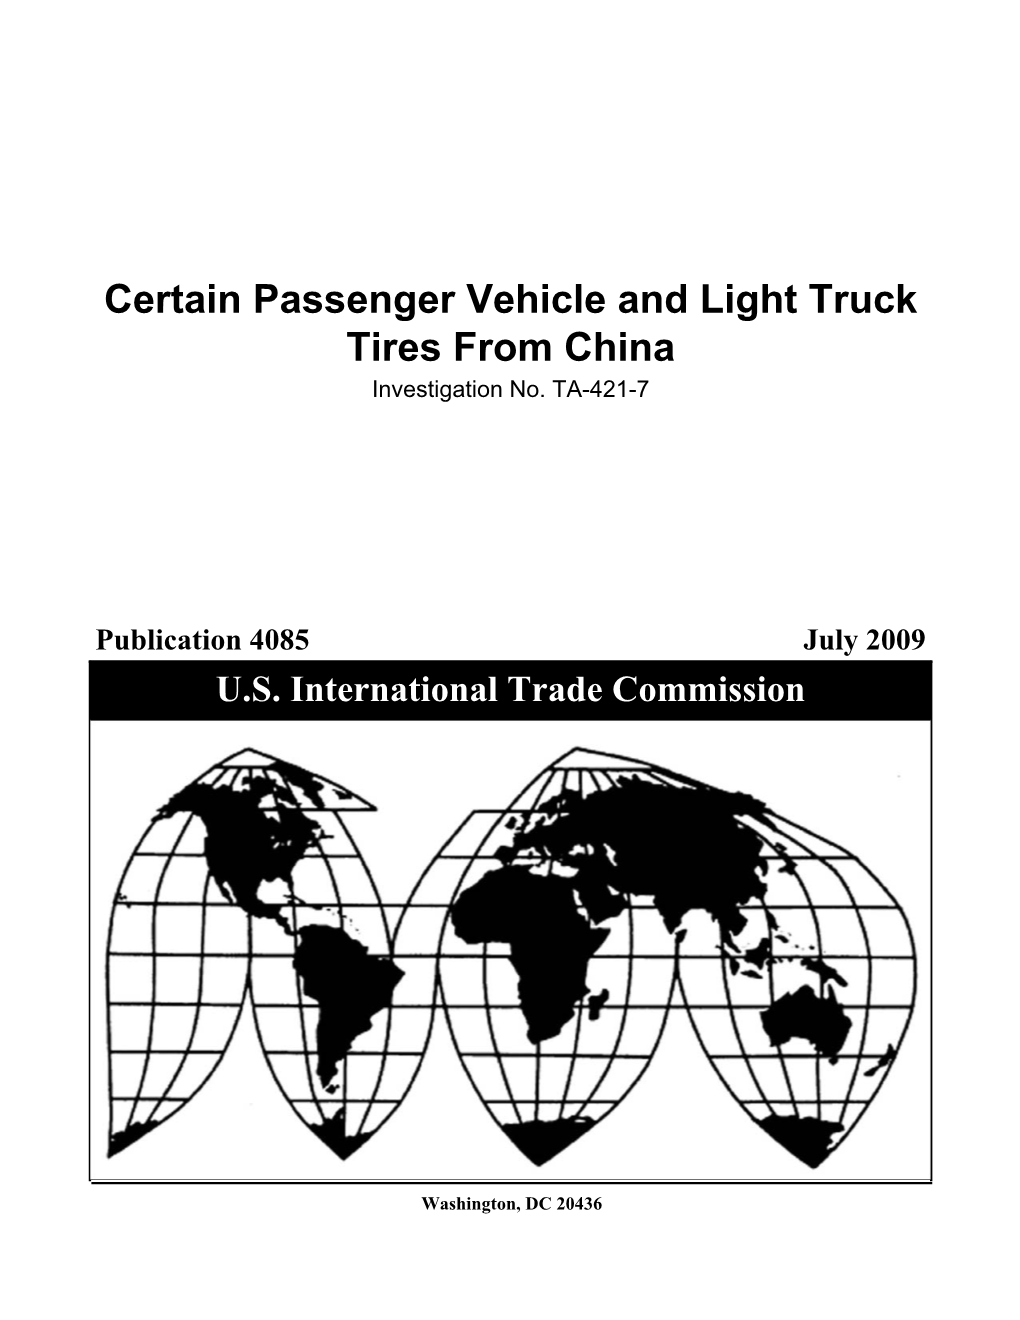 Certain Passenger Vehicle and Light Truck Tires from China Investigation No